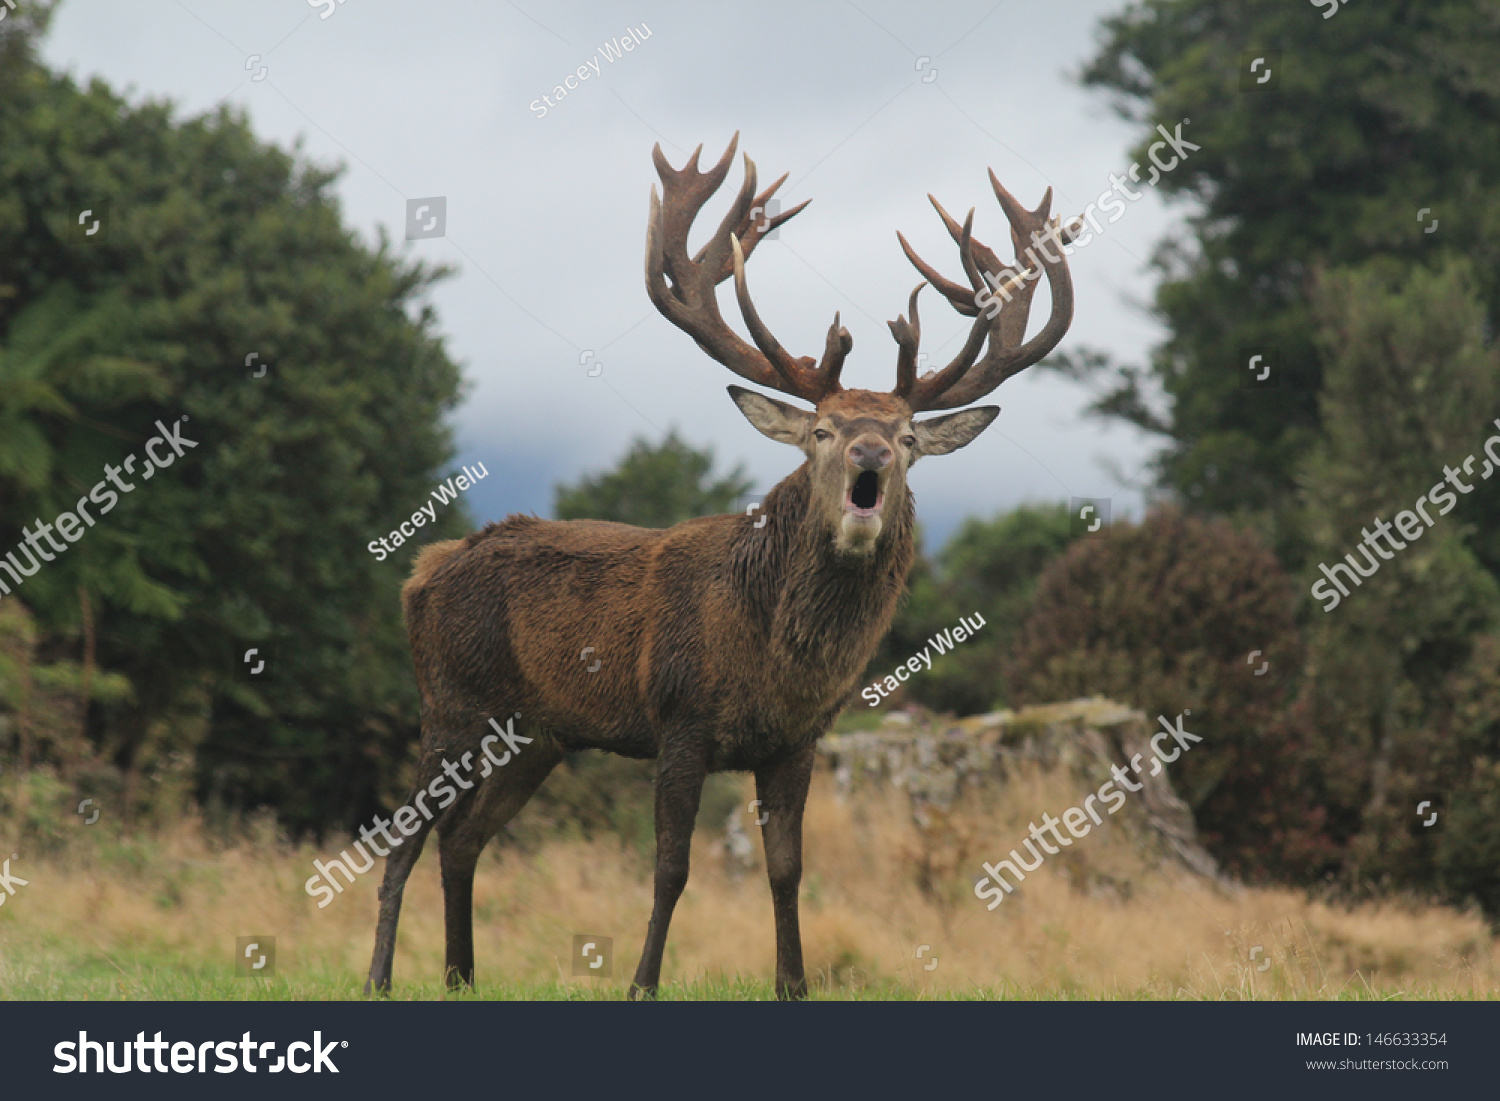 Closeup New Zealand Roaring Red Stag With Huge Rack And Open Mouth Looking At Camera #146633354